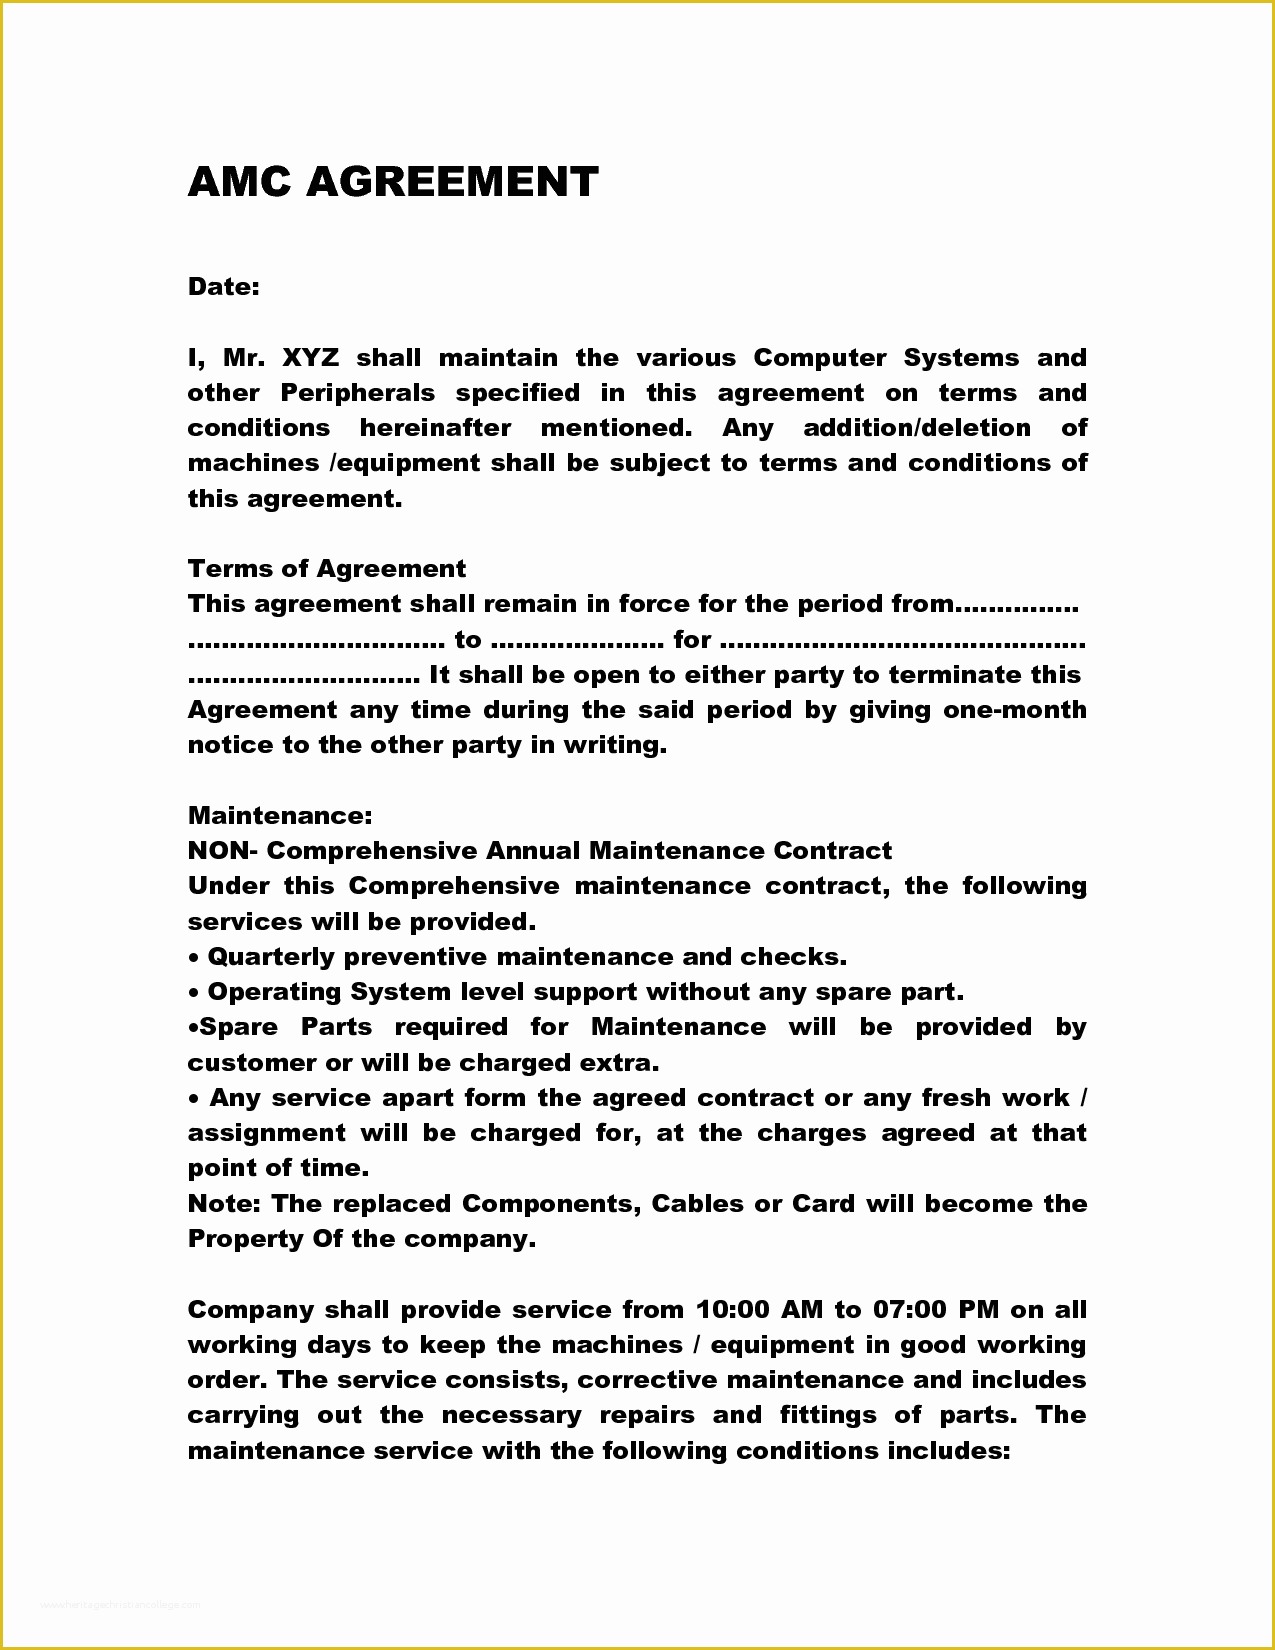 Maintenance Contract Template Free Of Annual Maintenance Contract Doc by Anks13 Puter